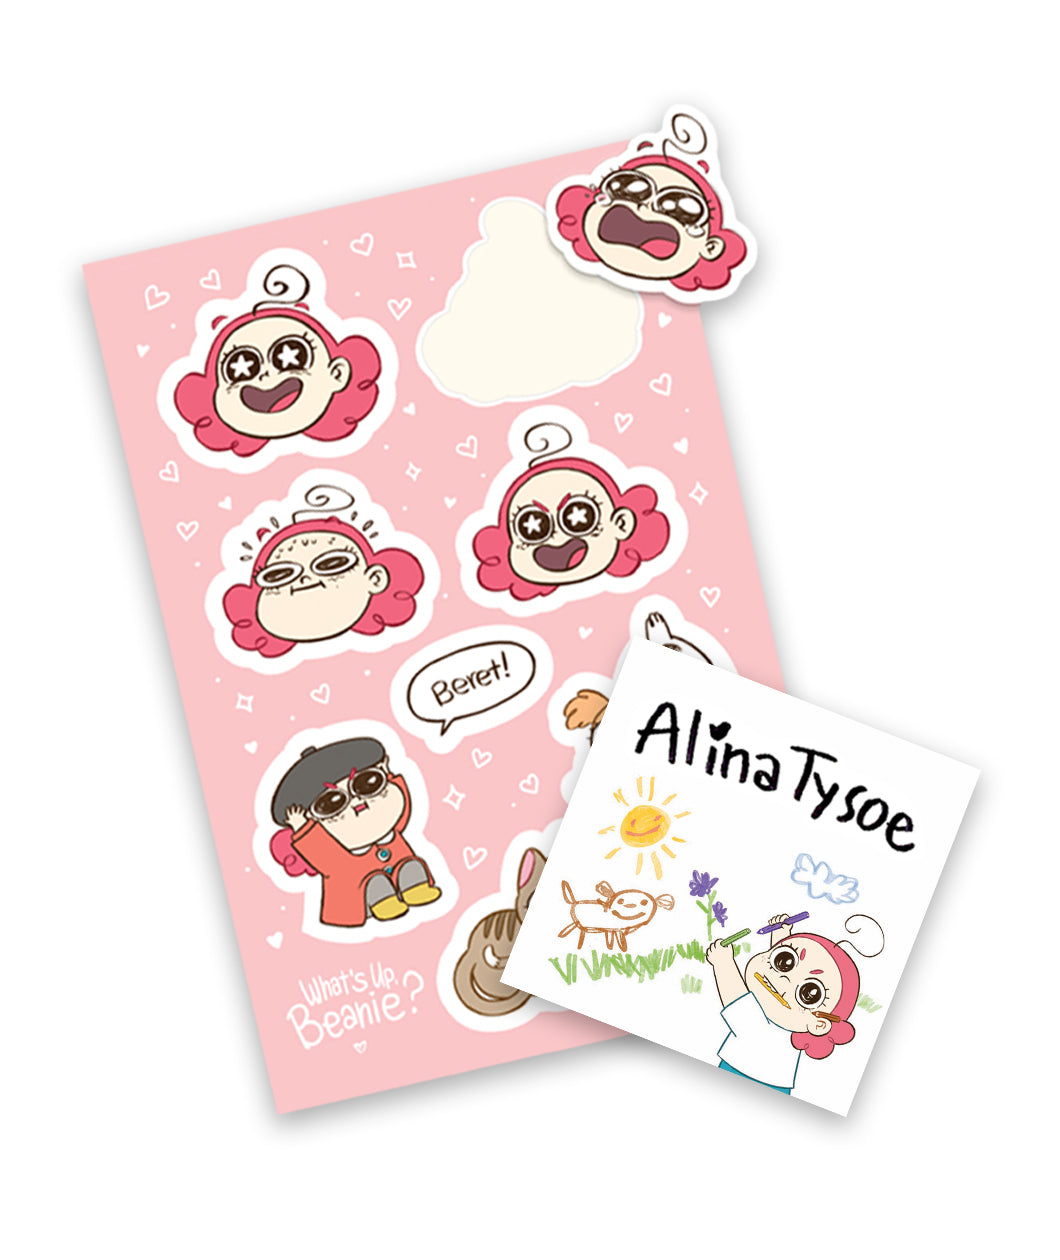 Two items on top of each other: A rectangular pink sticker sheet that contains 9 stickers of cartoon drawings of Beanie and pets. A signed square bookplate that has a drawing of Beanie sketching a scene and the signature 